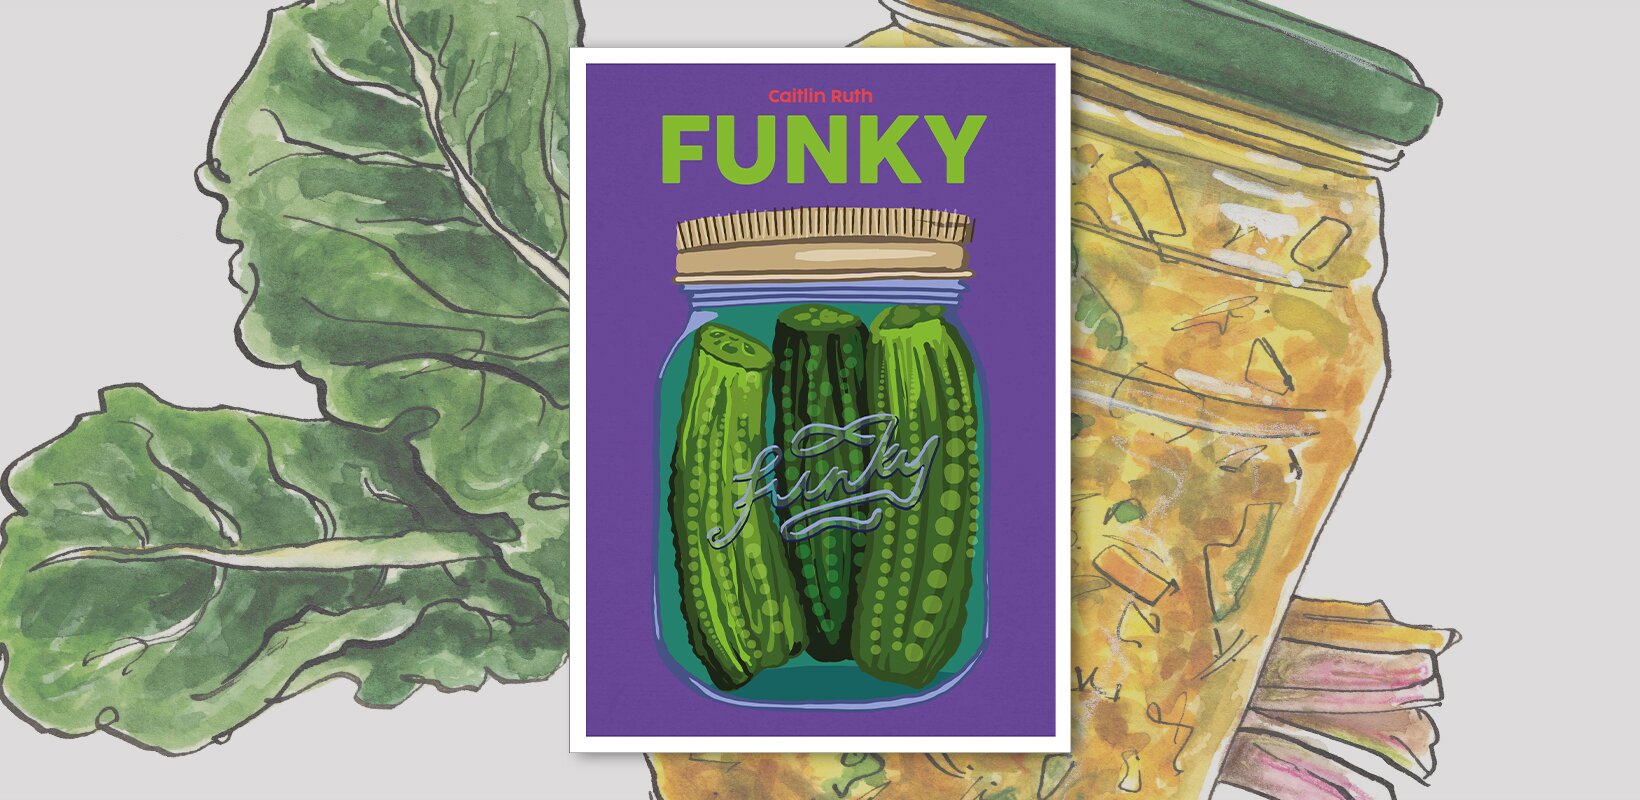 Book review: Funky by Caitlin Ruth